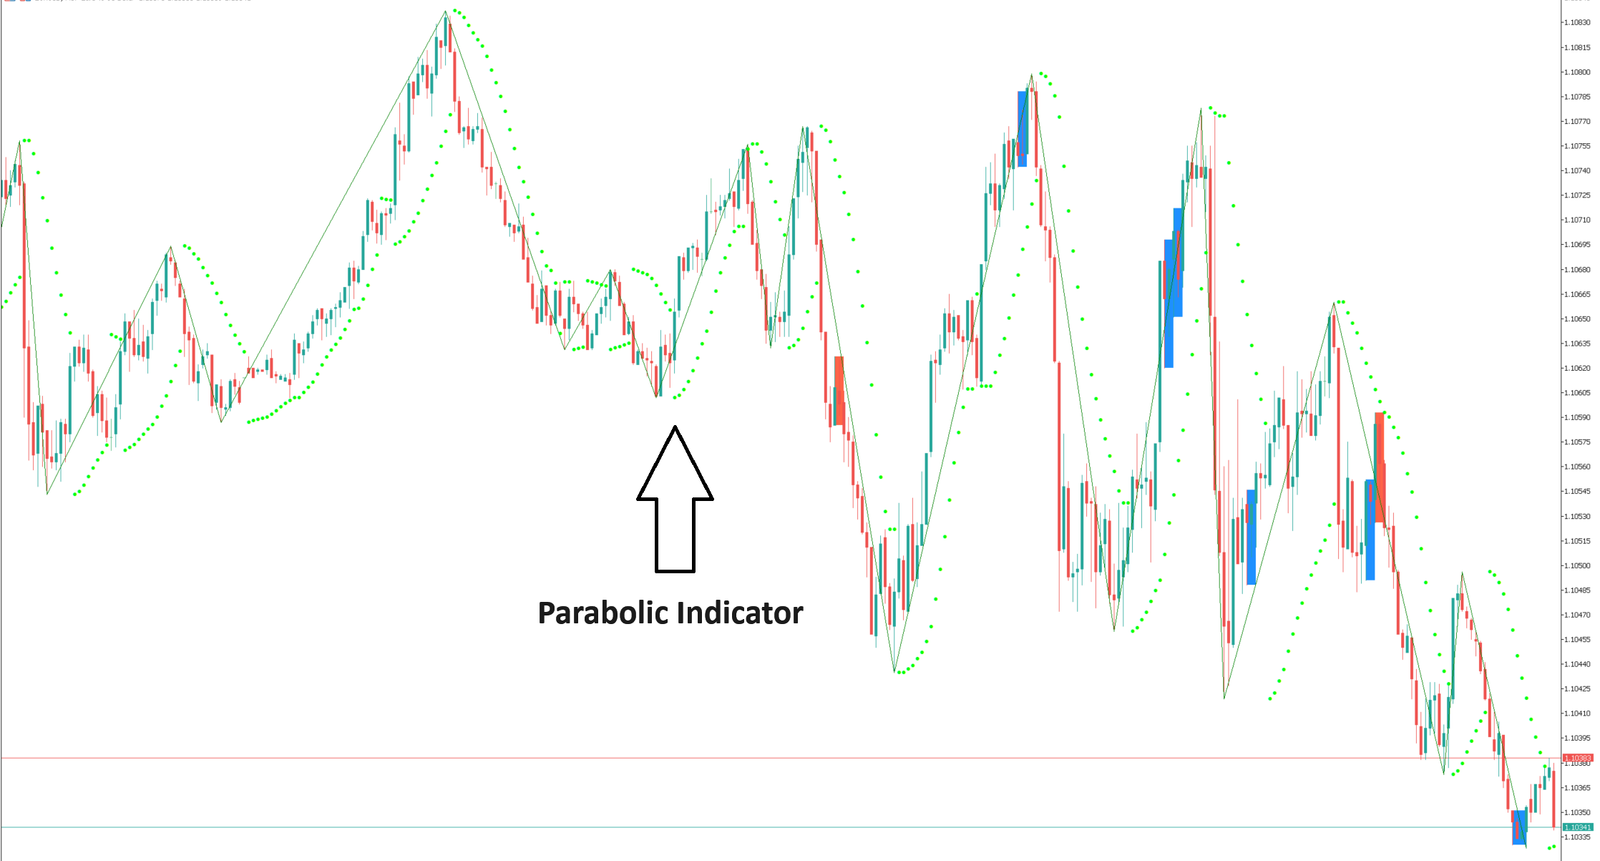 The Parabolic indicator, confirm or refute, sentence “stop, pay attention, Signals of the Parabolic indicator, Trend confirmation, short positions, acceleration factor, approach each other, not so reliable.